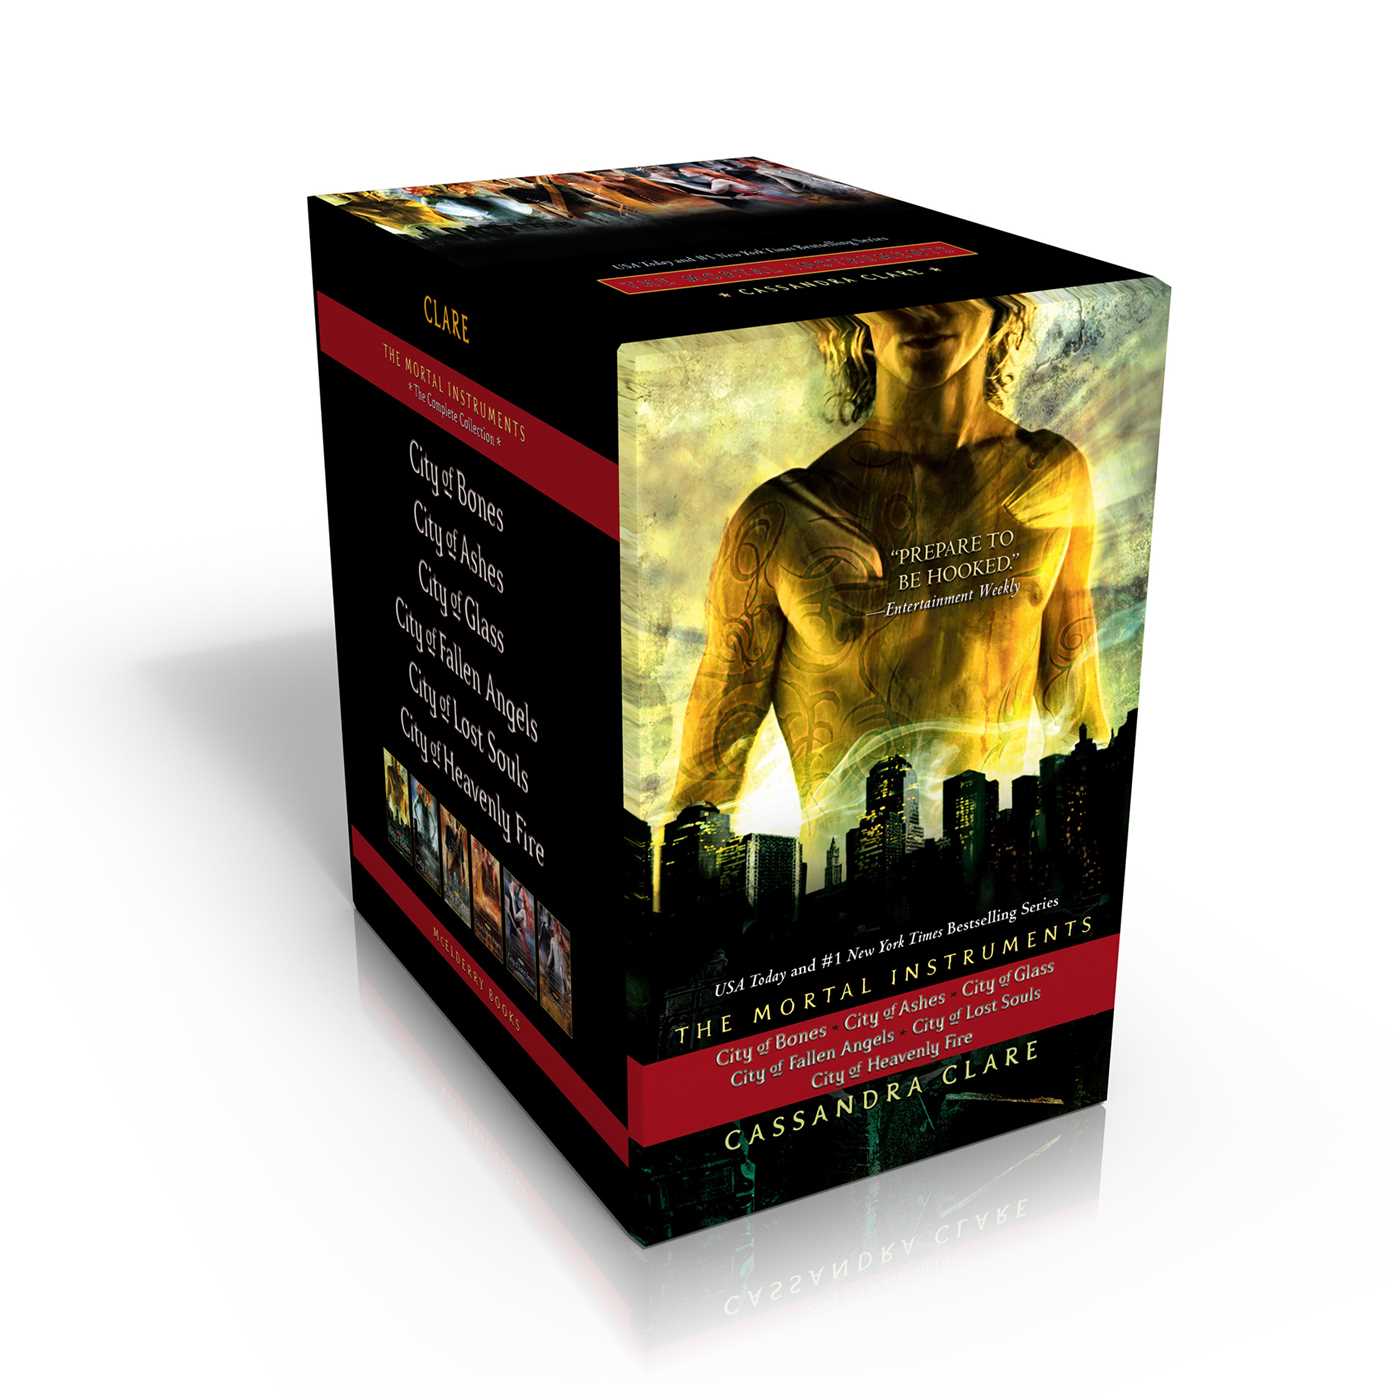 The Mortal Instruments - The Complete Collection  | Clare, Cassandra